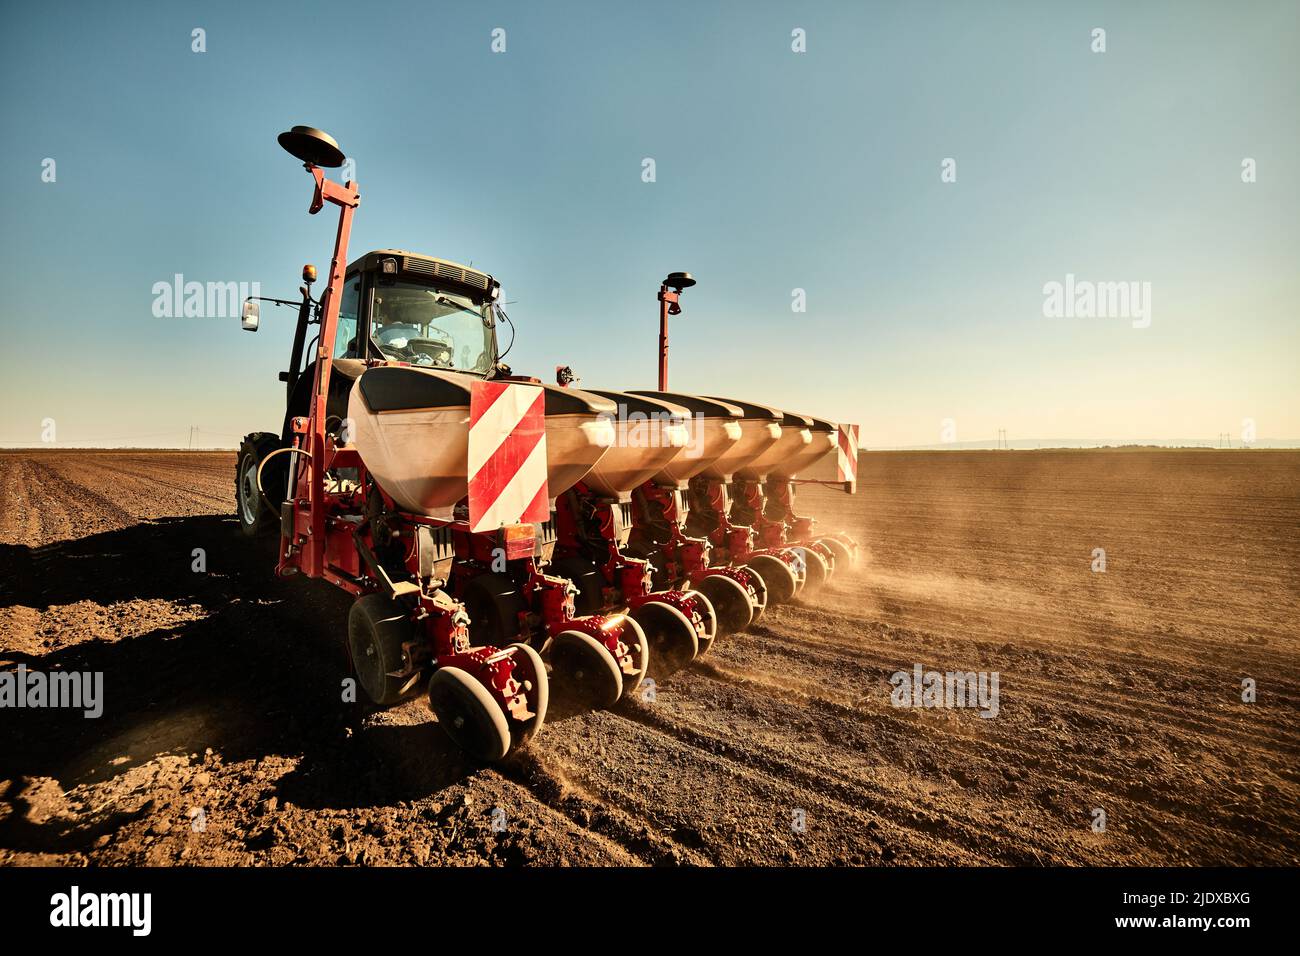 Tractor with seeder machine sowing seed in soybean farm Stock Photo